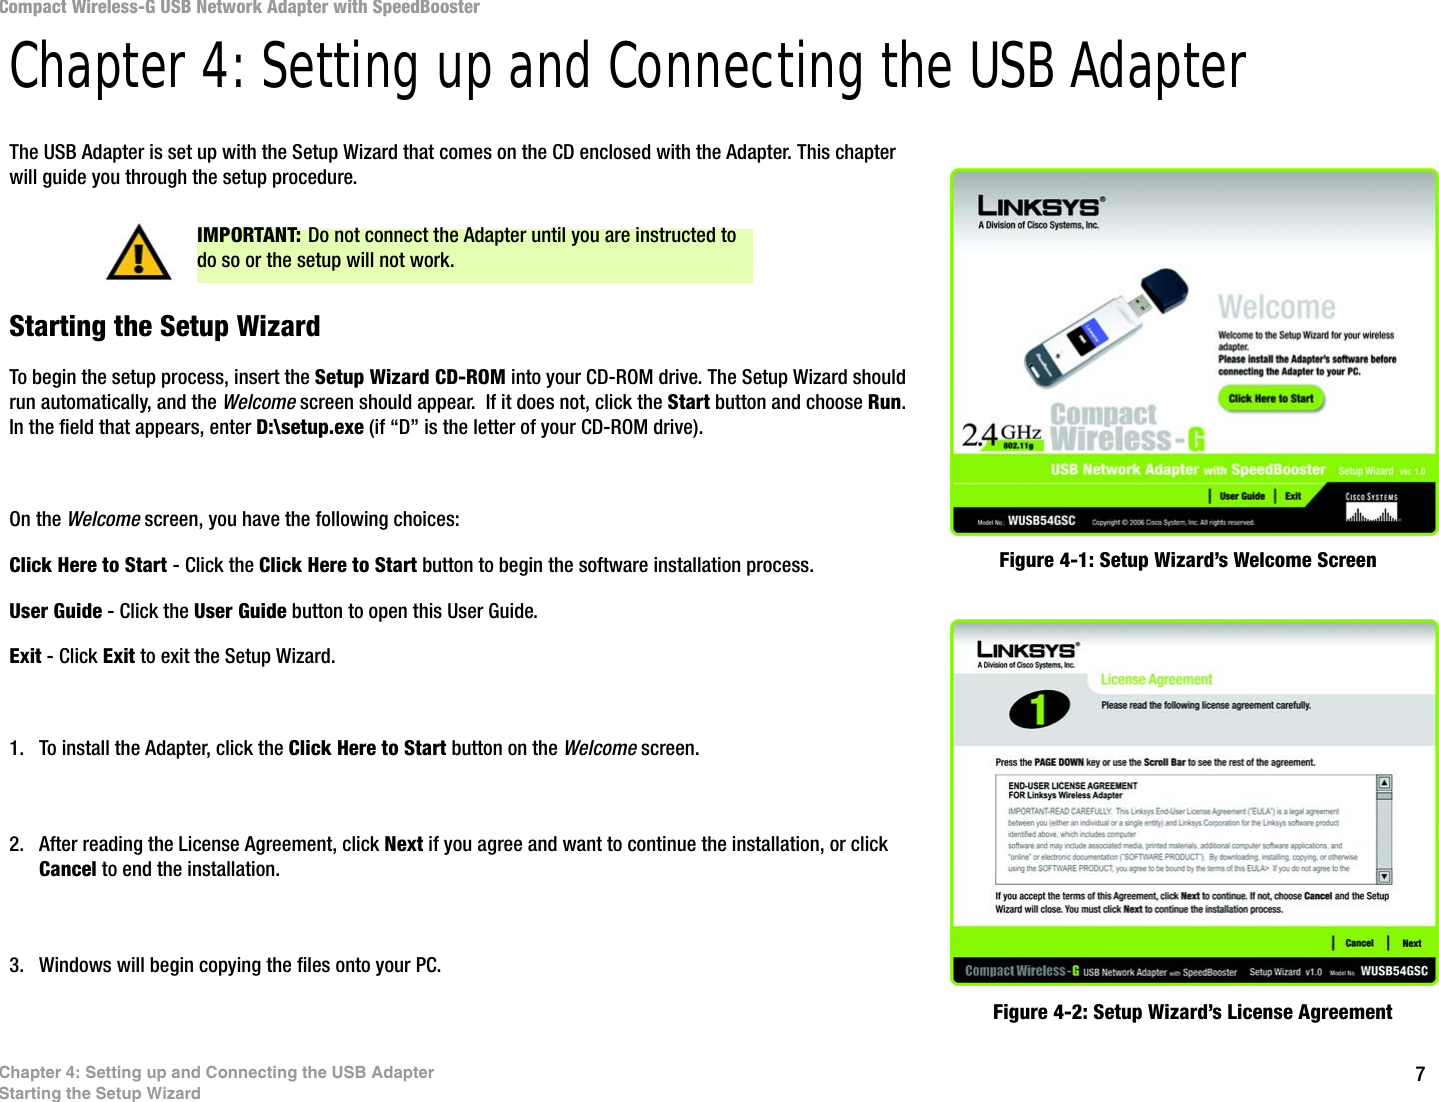 7Chapter 4: Setting up and Connecting the USB AdapterStarting the Setup WizardCompact Wireless-G USB Network Adapter with SpeedBoosterChapter 4: Setting up and Connecting the USB AdapterThe USB Adapter is set up with the Setup Wizard that comes on the CD enclosed with the Adapter. This chapter will guide you through the setup procedure. Starting the Setup WizardTo begin the setup process, insert the Setup Wizard CD-ROM into your CD-ROM drive. The Setup Wizard should run automatically, and the Welcome screen should appear.  If it does not, click the Start button and choose Run. In the field that appears, enter D:\setup.exe (if “D” is the letter of your CD-ROM drive). On the Welcome screen, you have the following choices:Click Here to Start - Click the Click Here to Start button to begin the software installation process. User Guide - Click the User Guide button to open this User Guide. Exit - Click Exit to exit the Setup Wizard.1. To install the Adapter, click the Click Here to Start button on the Welcome screen.2. After reading the License Agreement, click Next if you agree and want to continue the installation, or click Cancel to end the installation.3. Windows will begin copying the files onto your PC.Figure 4-1: Setup Wizard’s Welcome ScreenFigure 4-2: Setup Wizard’s License AgreementIMPORTANT: Do not connect the Adapter until you are instructed to do so or the setup will not work.